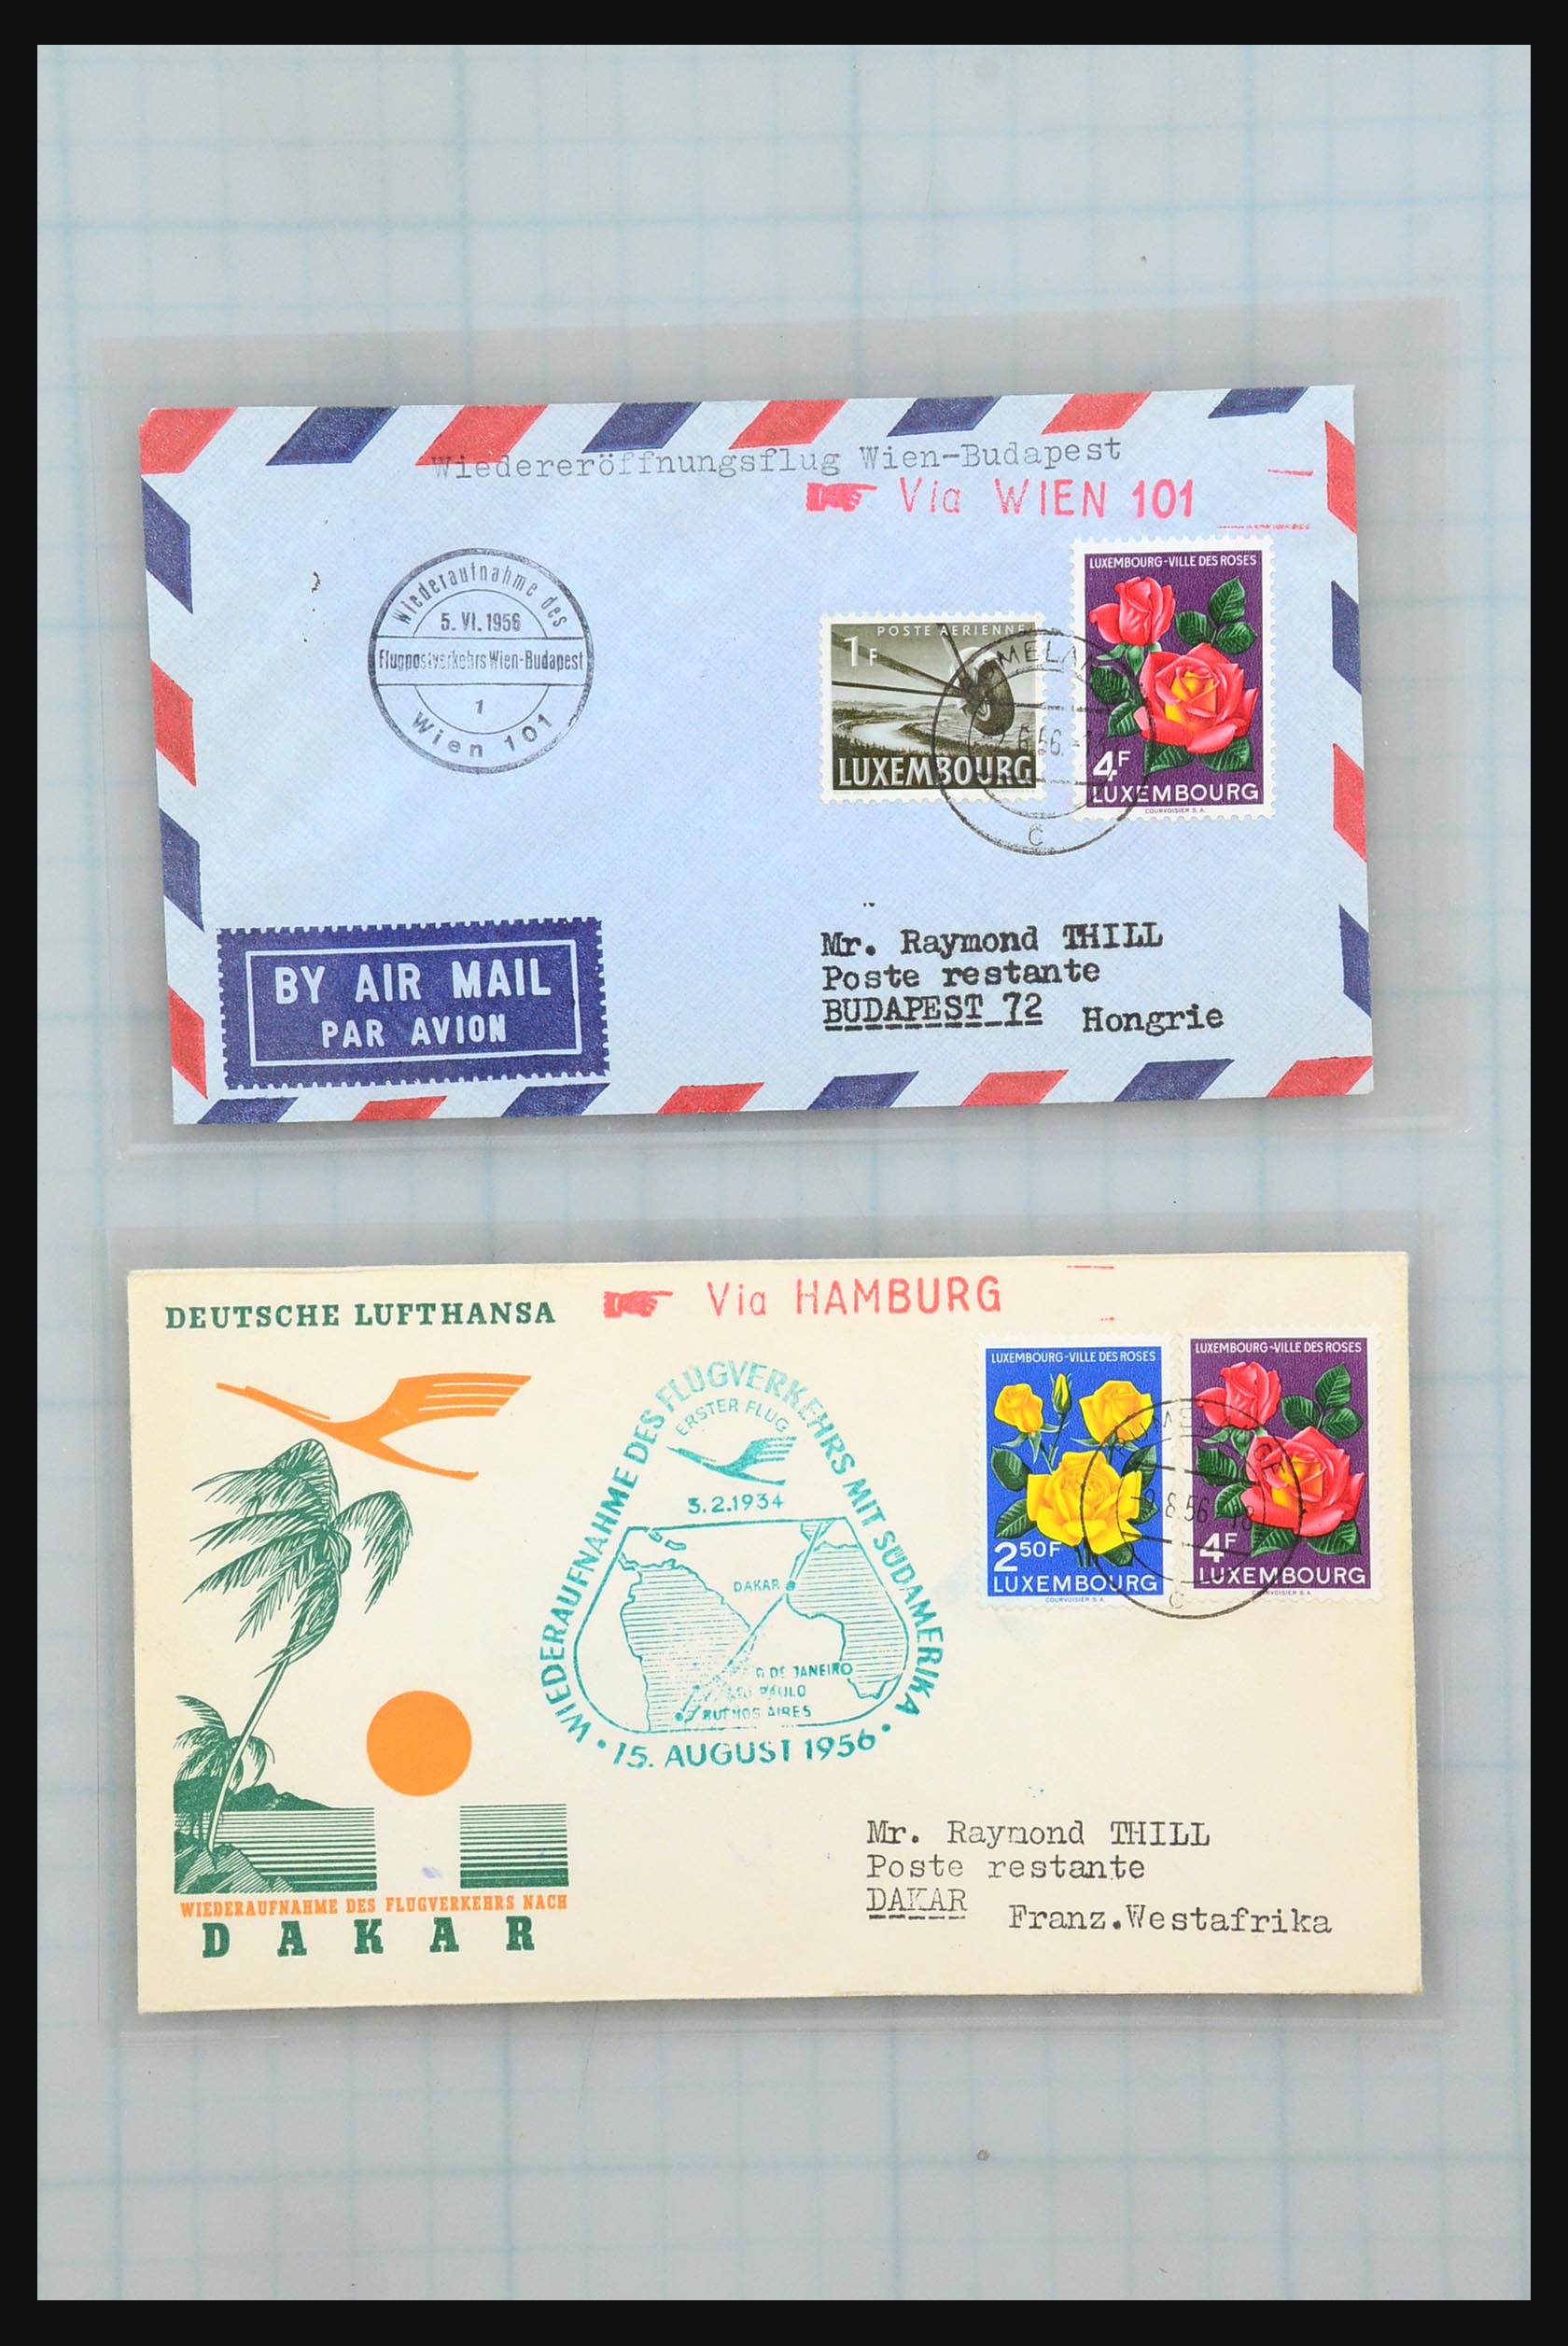 31358 075 - 31358 Portugal/Luxemburg/Greece covers 1880-1960.